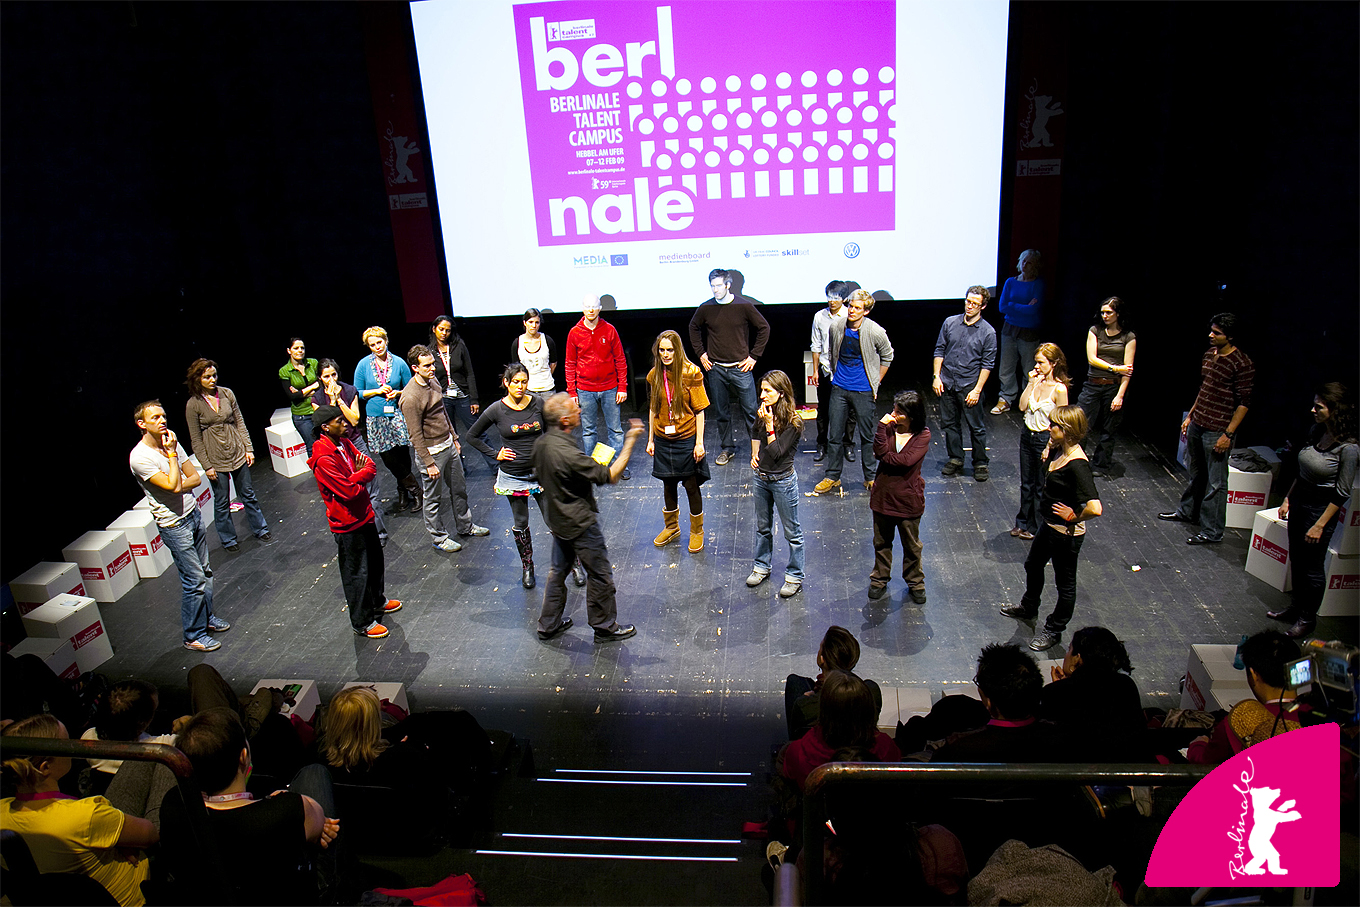 Jean-Louis teaching talents at the Berlinale Talent Campus